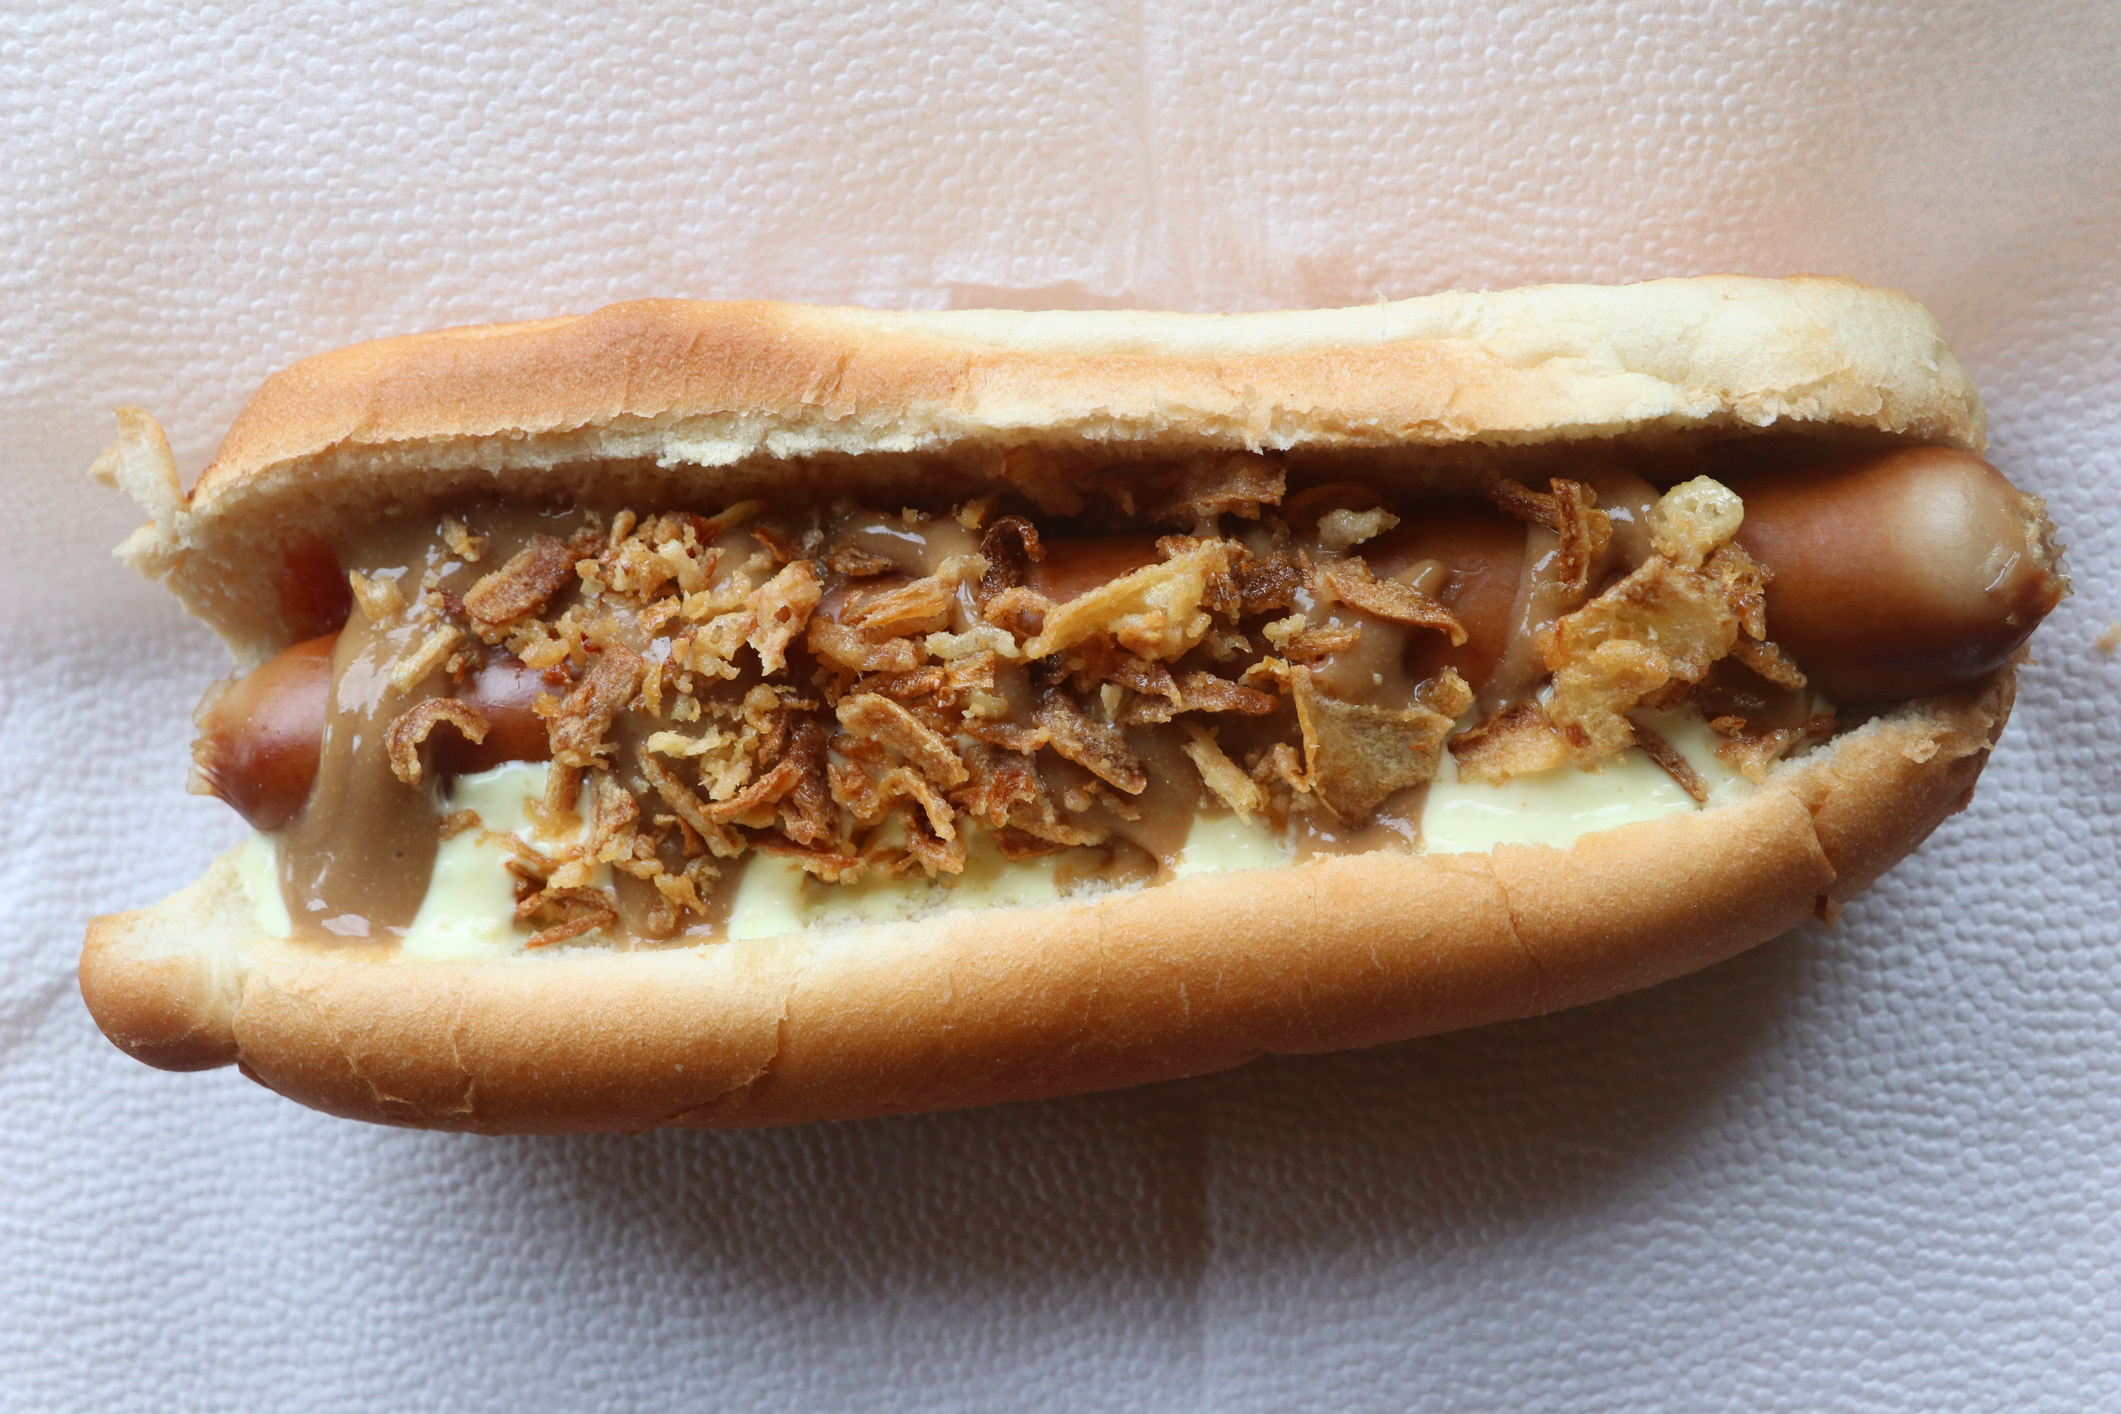 Hot dog with toppings and crispy fried onions on a bun